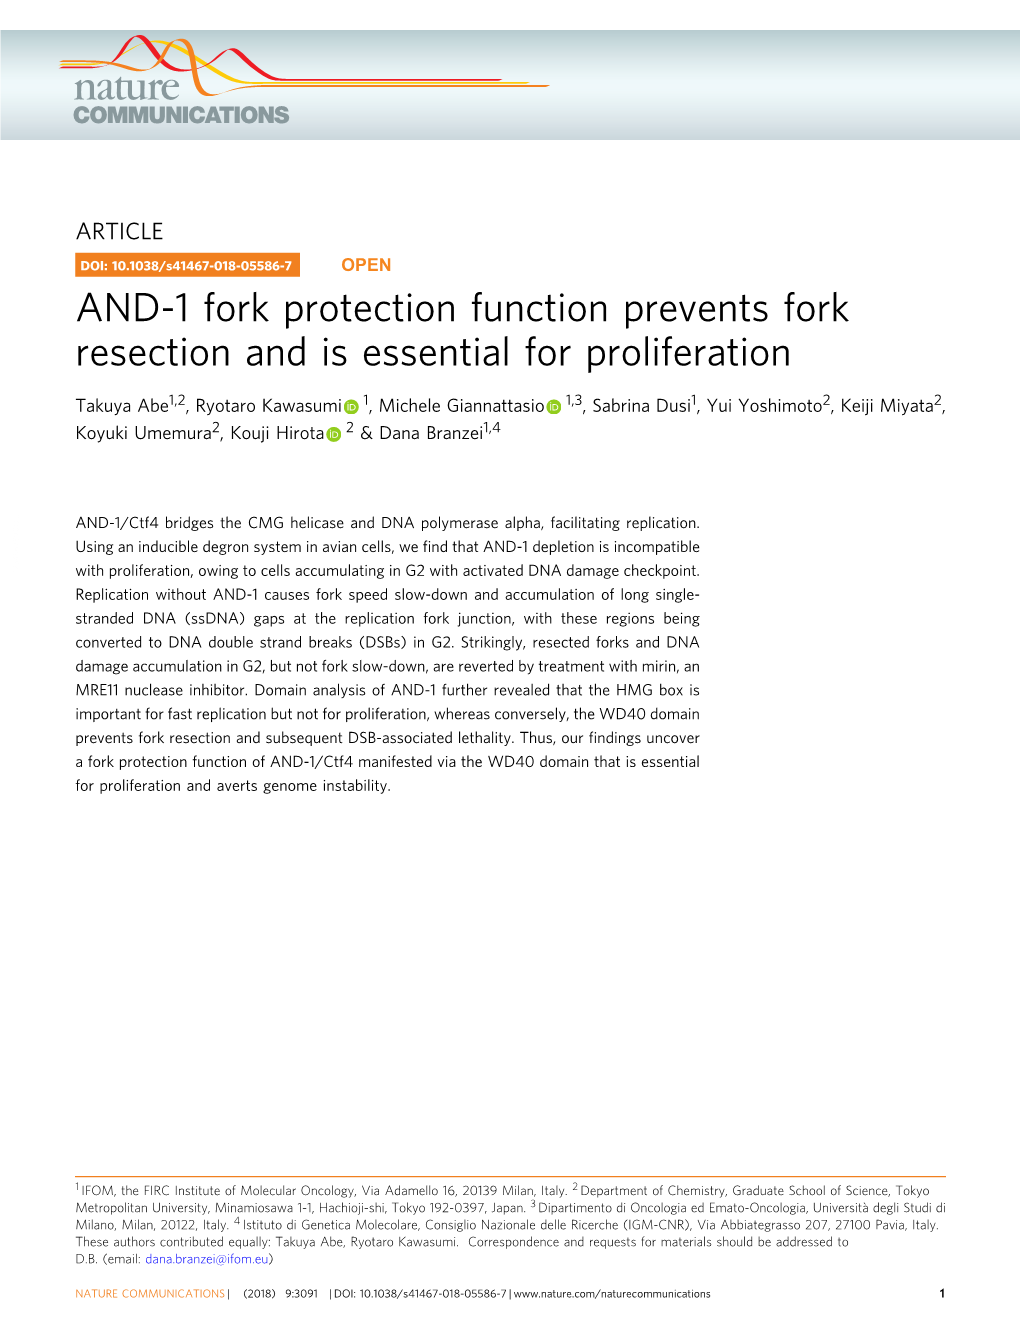 AND-1 Fork Protection Function Prevents Fork Resection and Is Essential for Proliferation